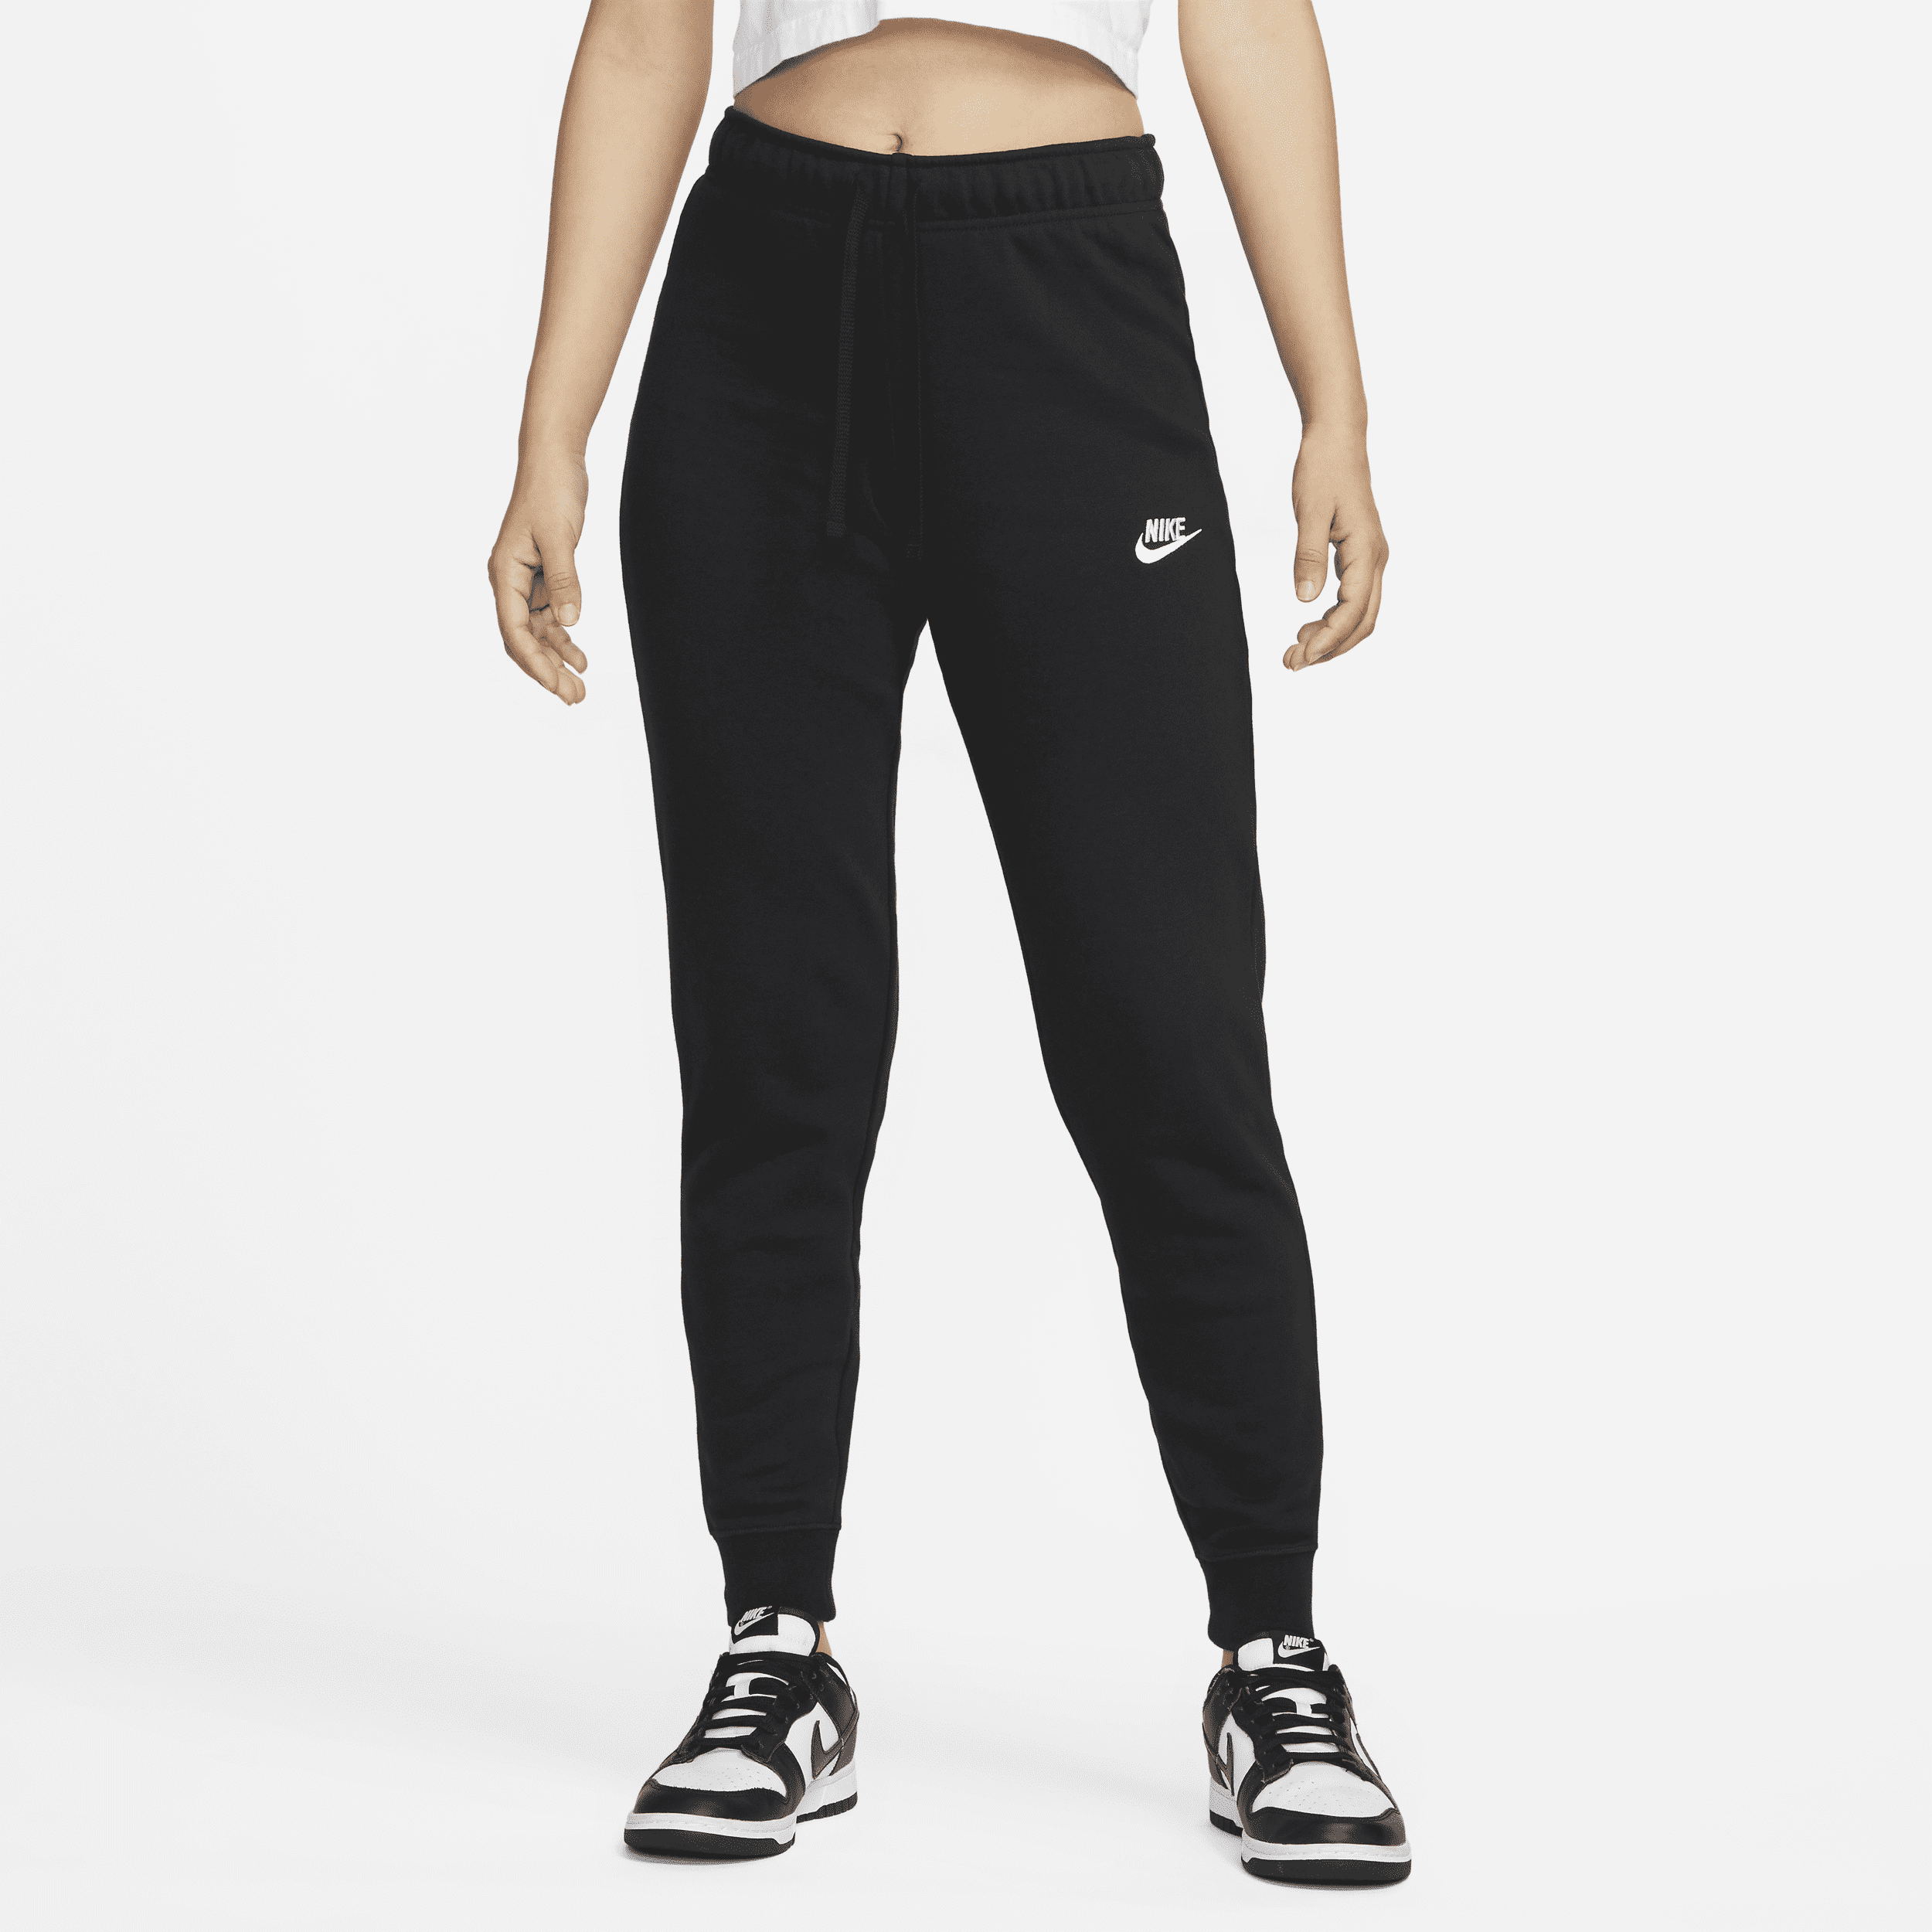 Plastic Memories Jogger Pants for Women Knot Front Boot-cut Sweatpants  (Color : Black, Size : Tall XL) : Buy Online at Best Price in KSA - Souq is  now : Fashion